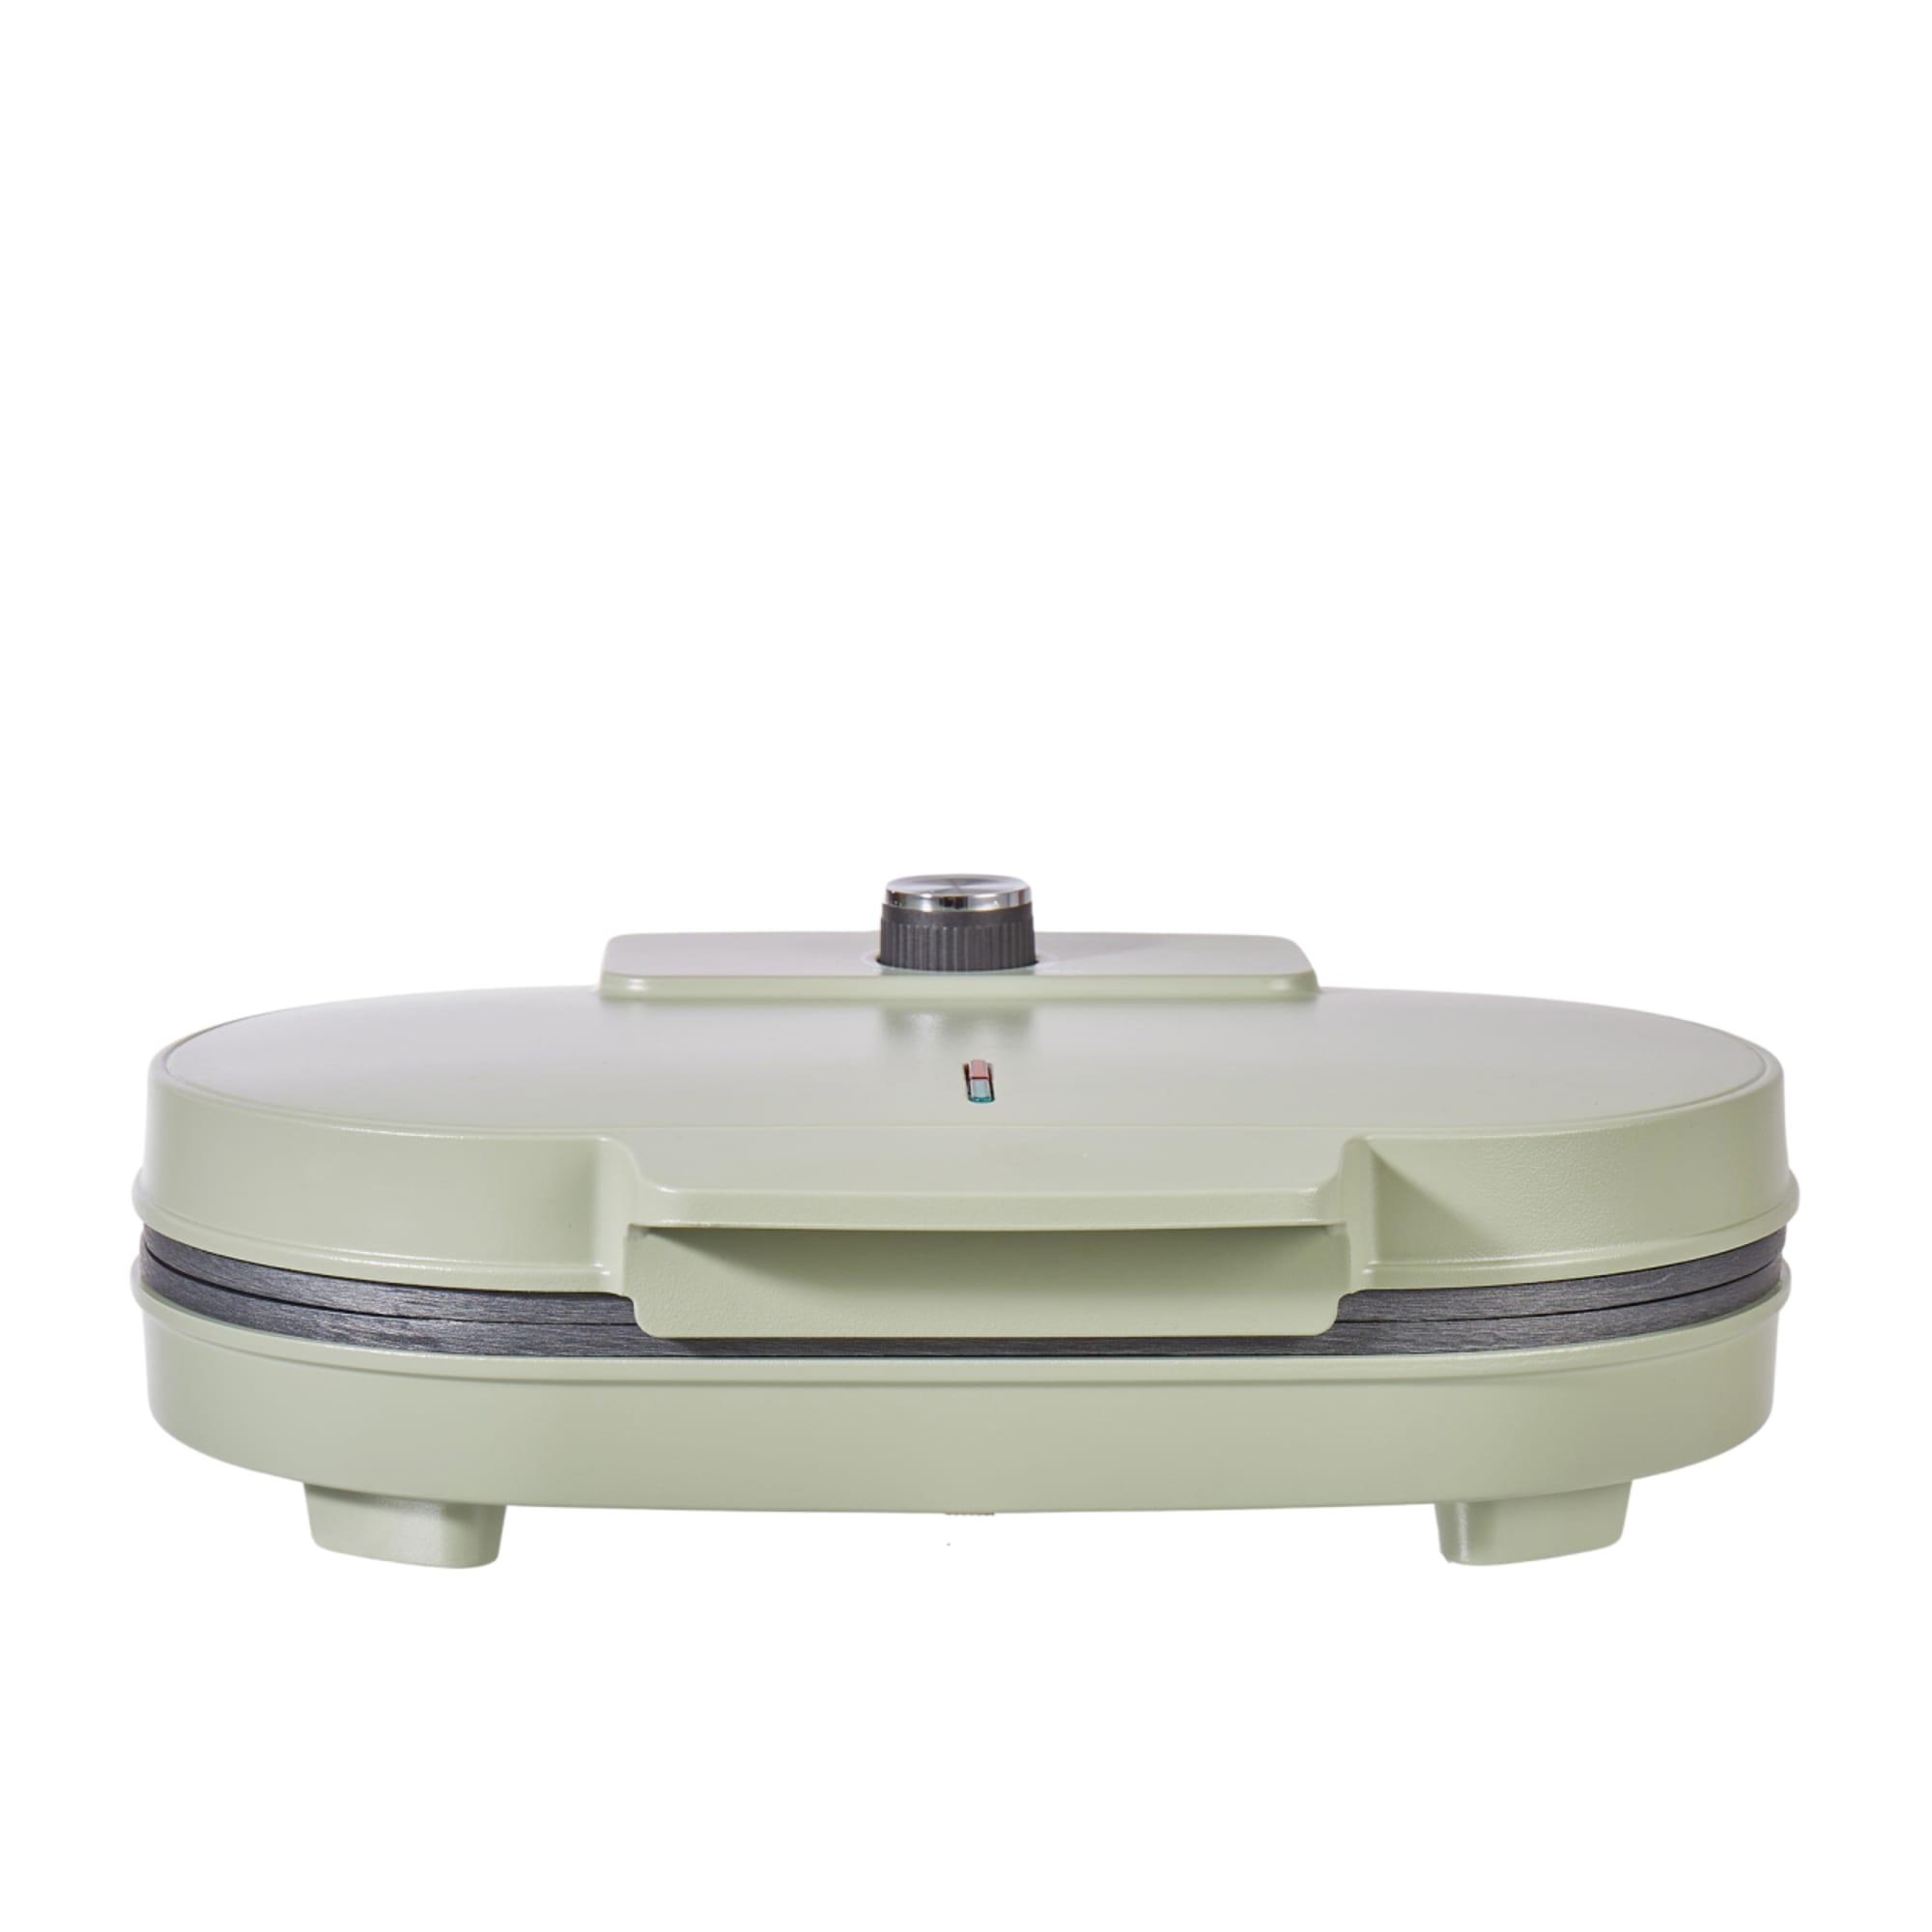 Davis & Waddell Electric Non Stick Double Waffle Maker Green Image 6